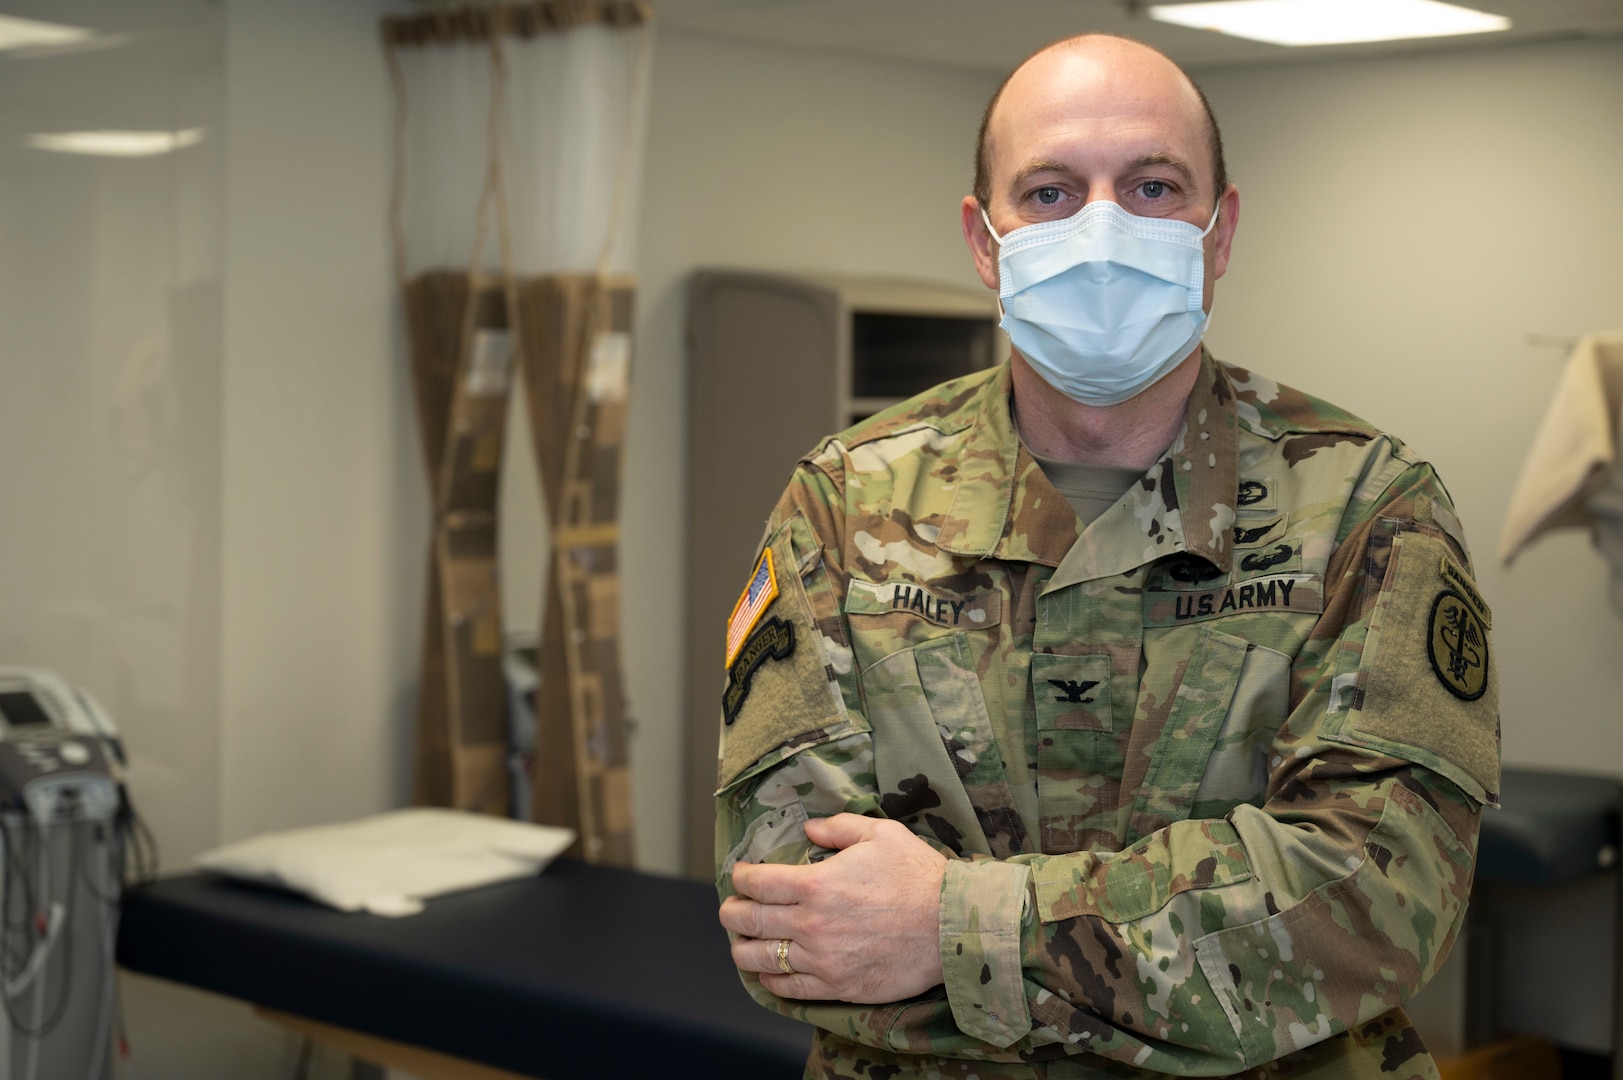 U.S. Army Col. Chad Haley, MD, Keller Army Community Hospital Chief of surgery poses for a photo in the physical therapy room at the 87th Medical Group on Joint Base McGuire-Dix-Lakehurst, N.J., Feb. 3, 2022. In coordination with KACH, a military orthopedic surgeon will be traveling to Joint Base MDL once a month to evaluate patients in need of potential surgical and postoperative care. (U.S. Air Force photo by Senior Airman Ariel Owings)